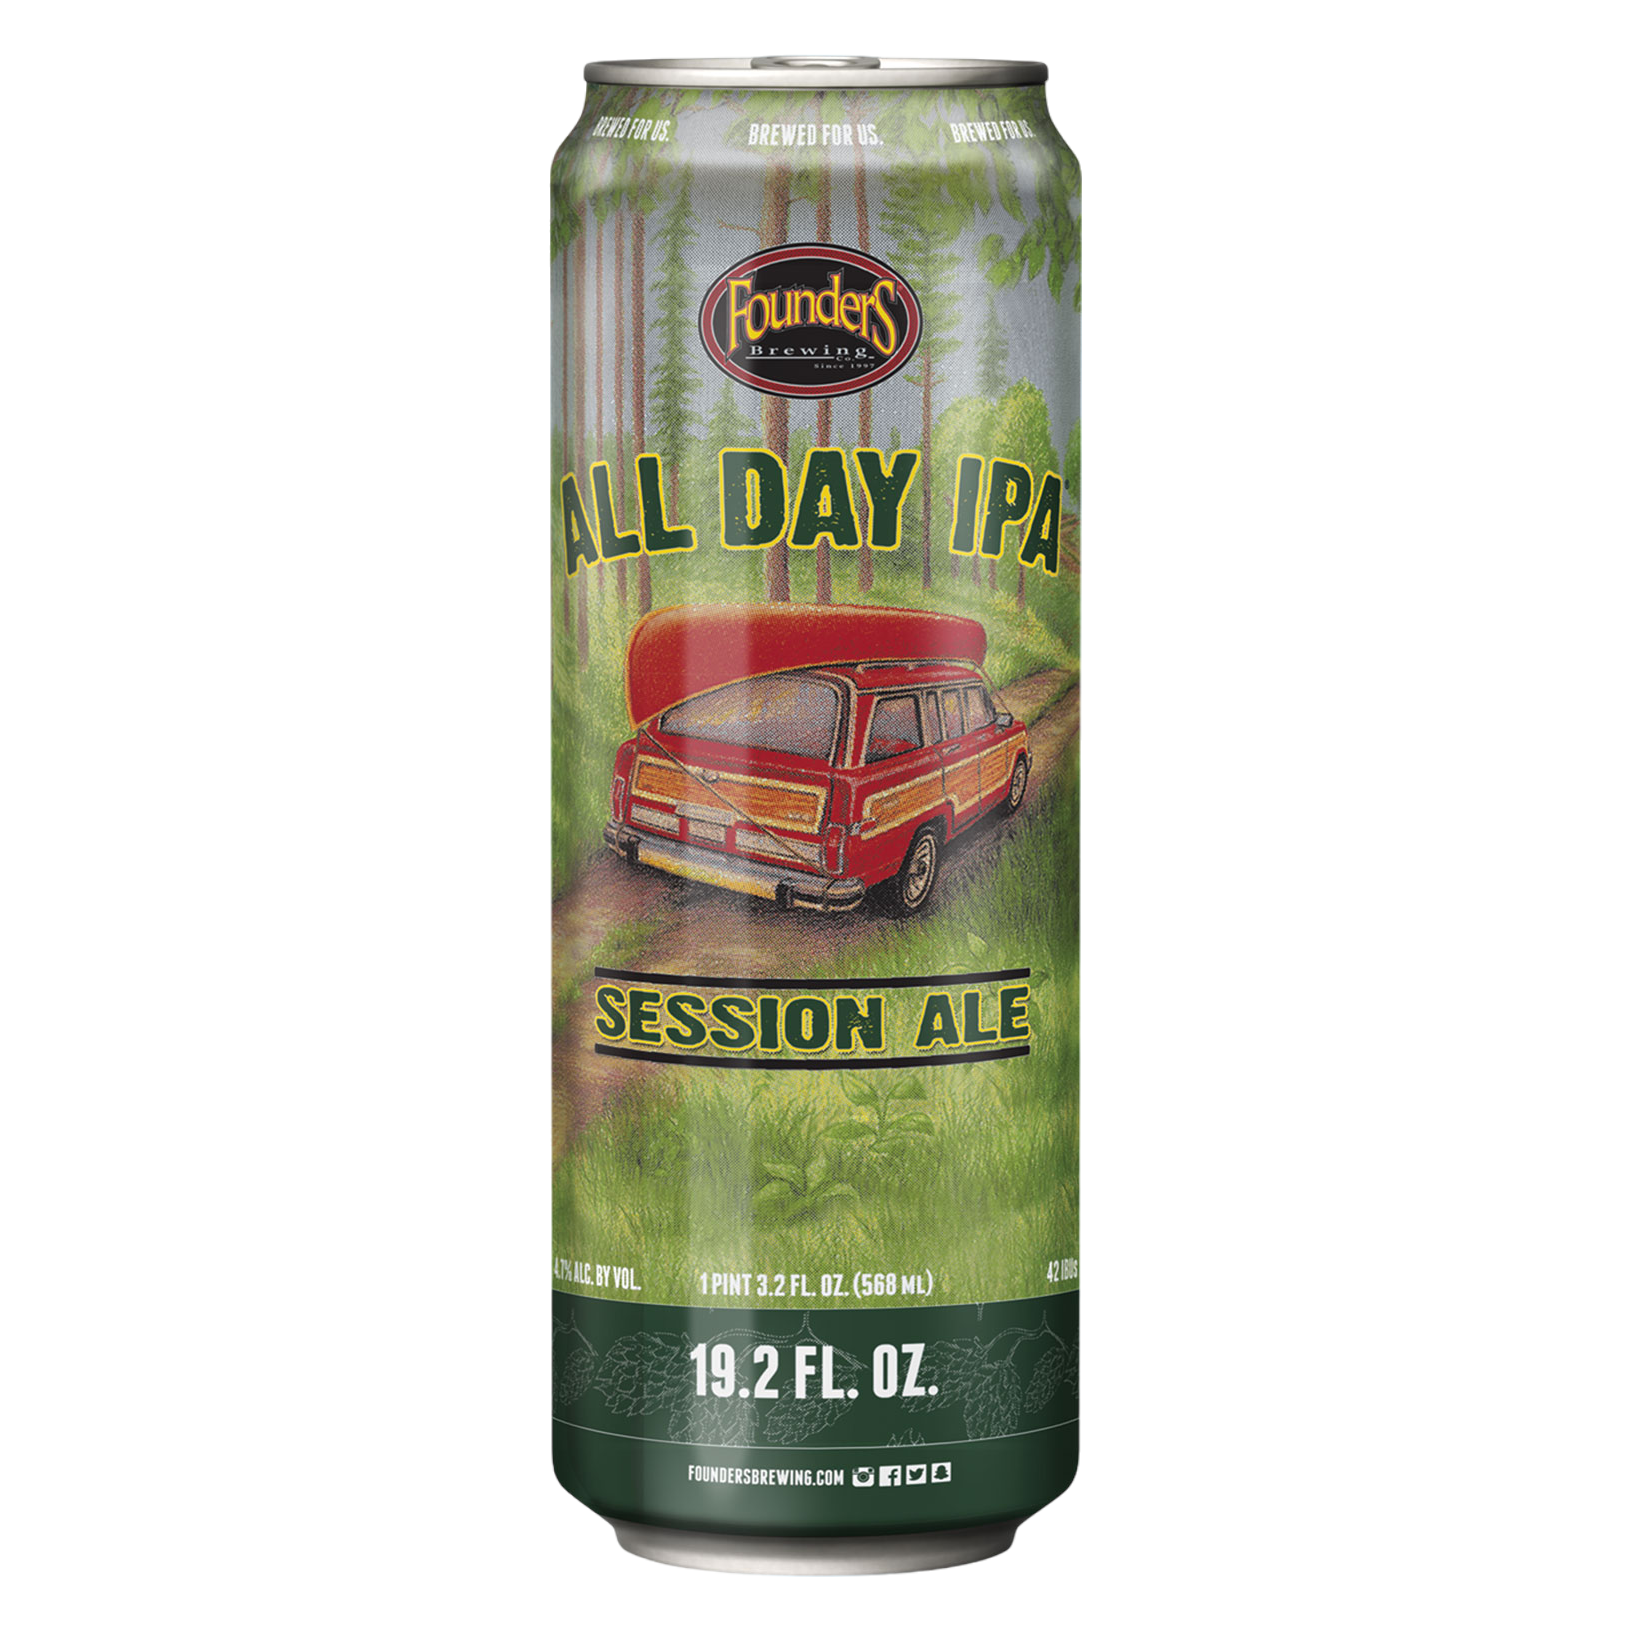 Founders All Day IPA 19.2 oz Can 4.7% ABV